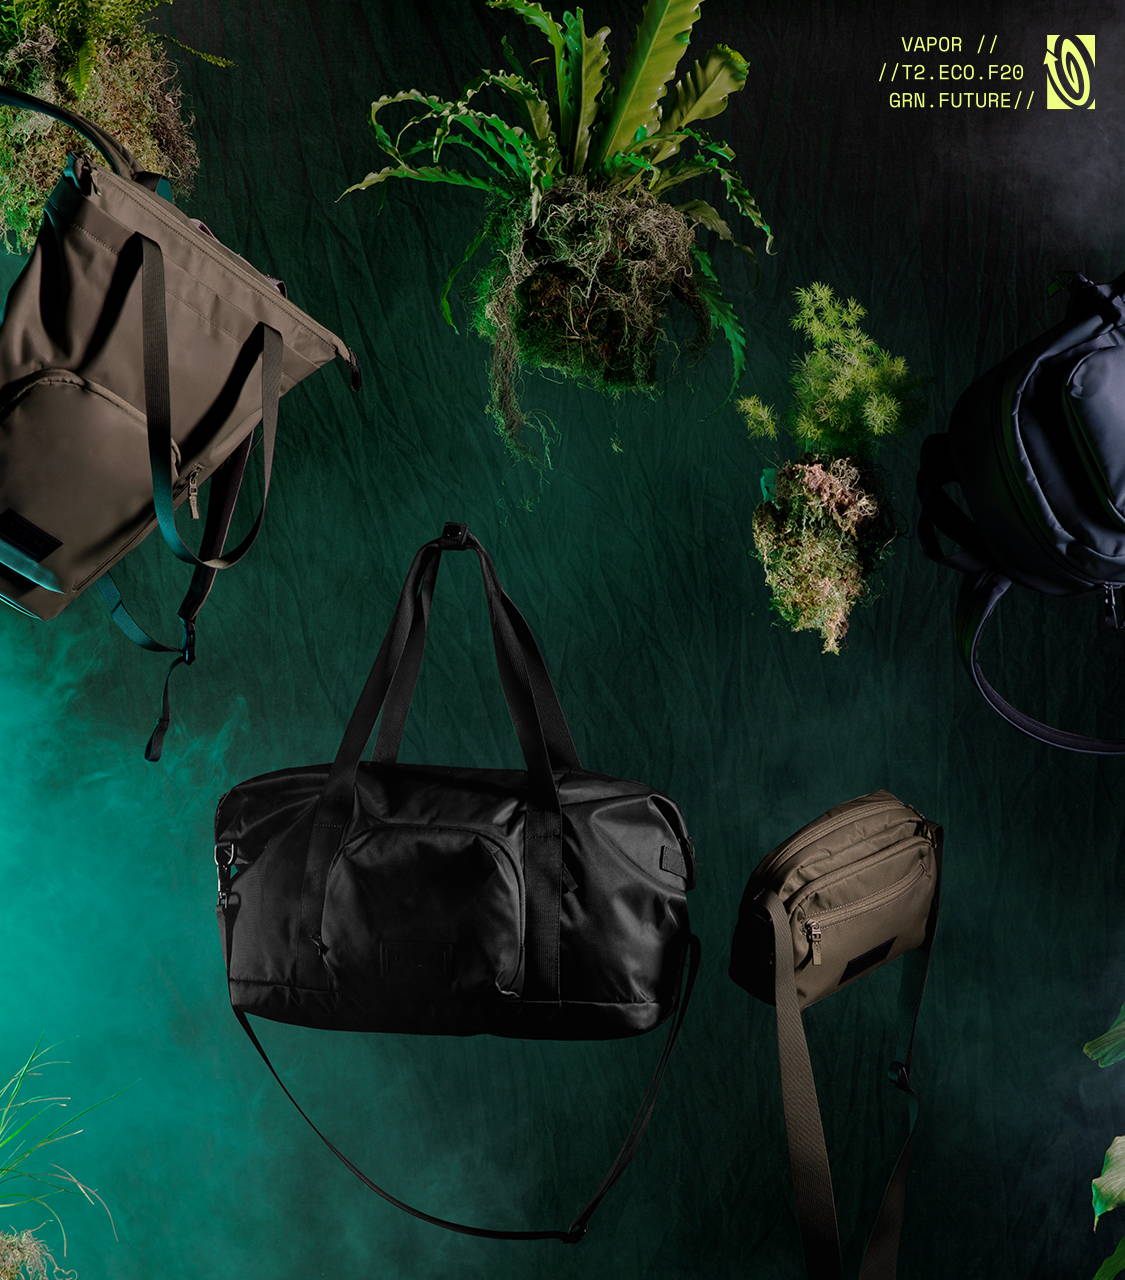 Image of Vapor Collection products floating in a dark room with mist in the background. The Vapor Tote, Vapor Duffel, Vapor Crossbody, are all featured with plants also floating. Copy reads: VAPOR // // T2.ECO.F20 GRN.FUTURE //